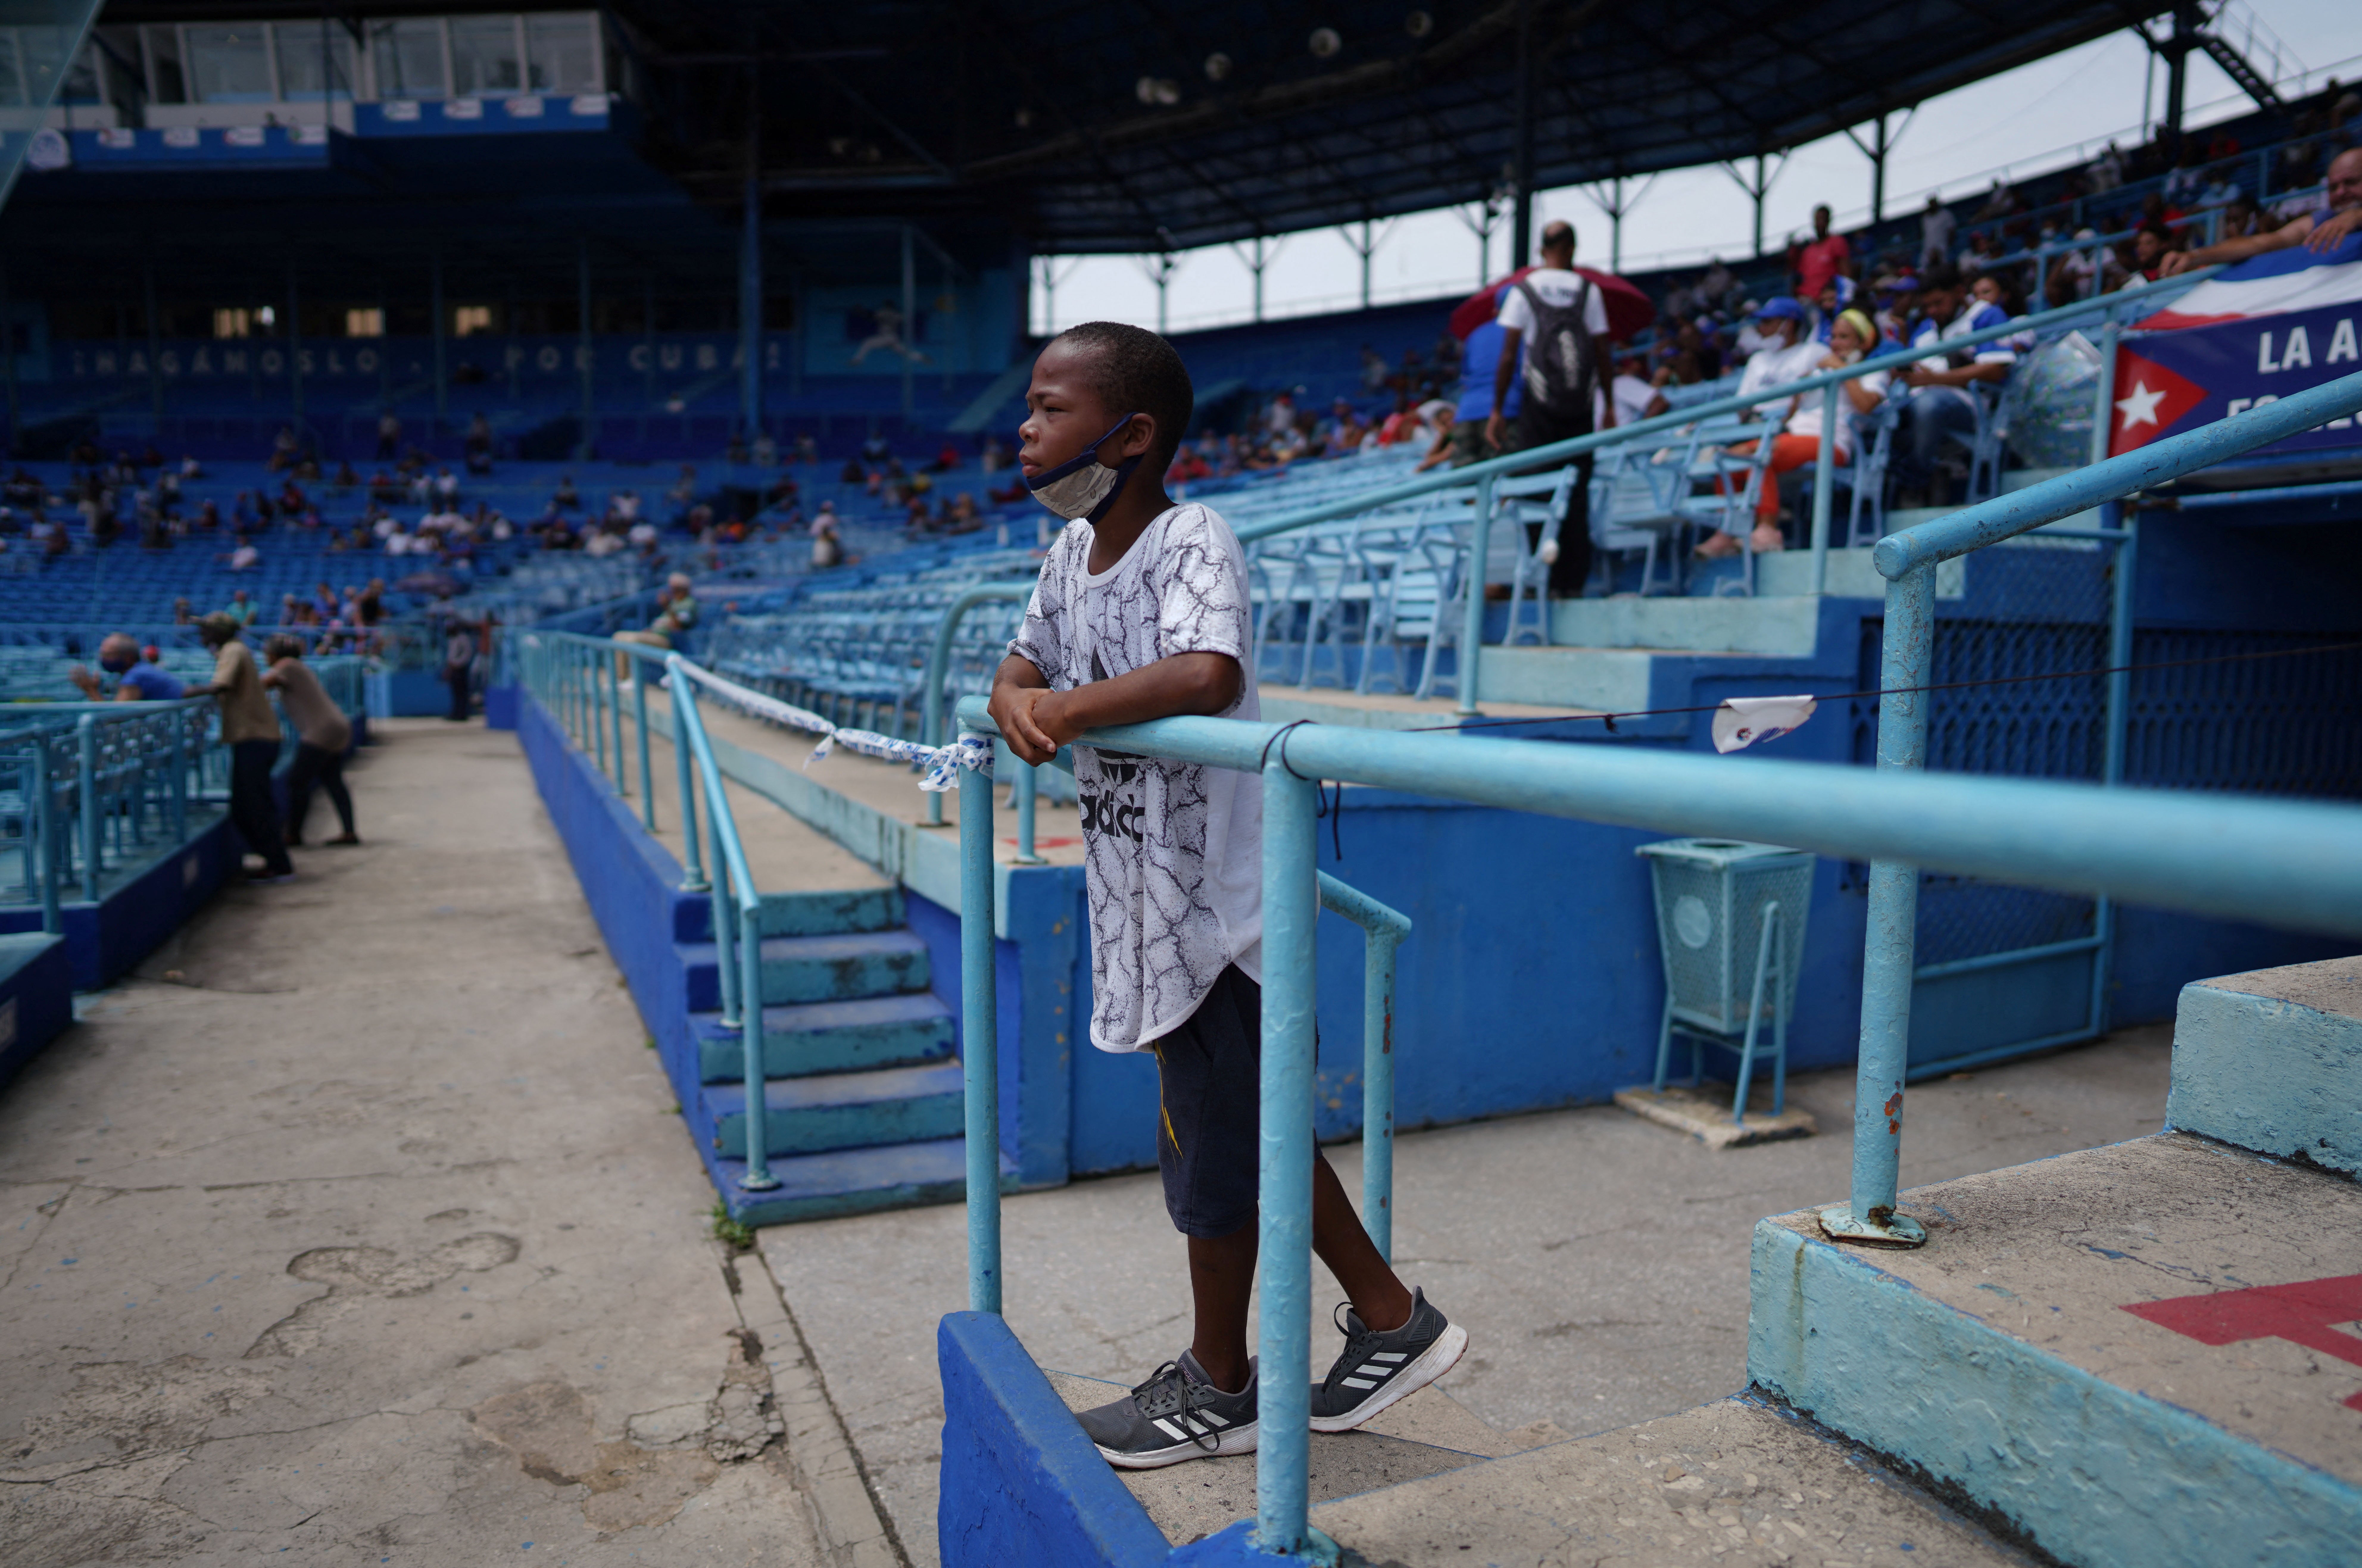 A child watches a baseball match between Industriales and Artemisa